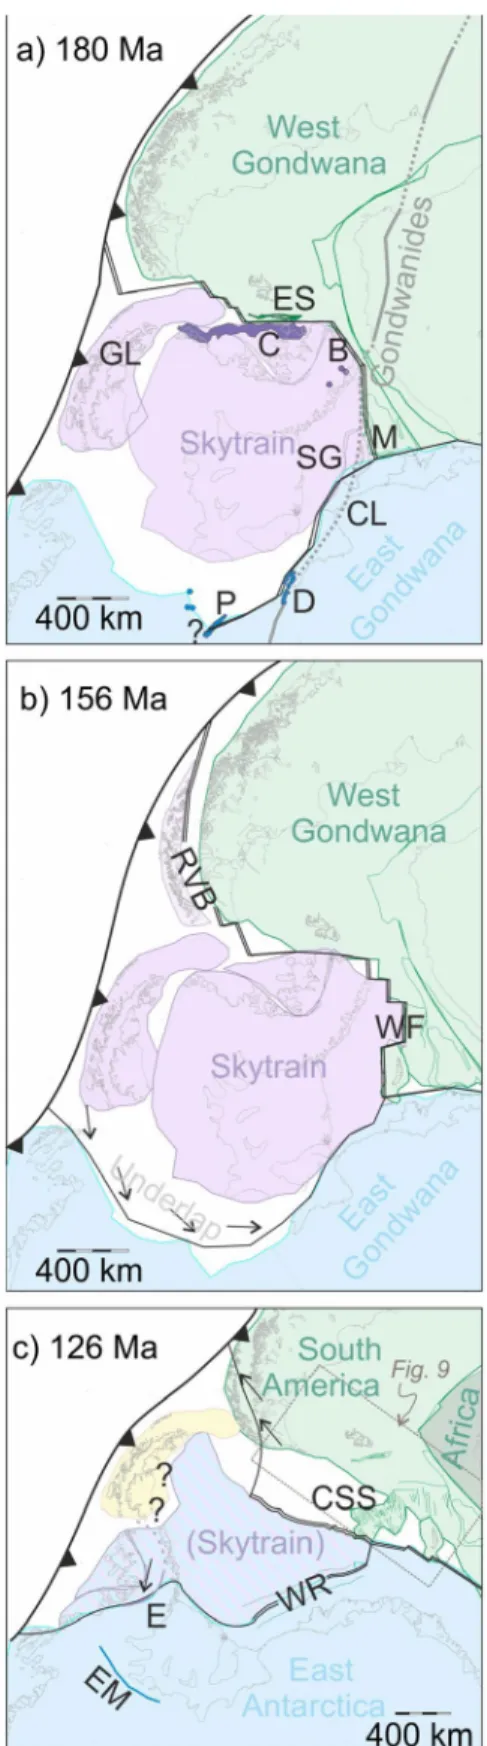 Figure 8.  Regional tectonic reconstructions featuring the Skytrain plate at (a) its onset around 180 Ma (FIT),  (b) 156 Ma (M25), and (c) its incorporation into the East Antarctic plate around 126 Ma (C34o)